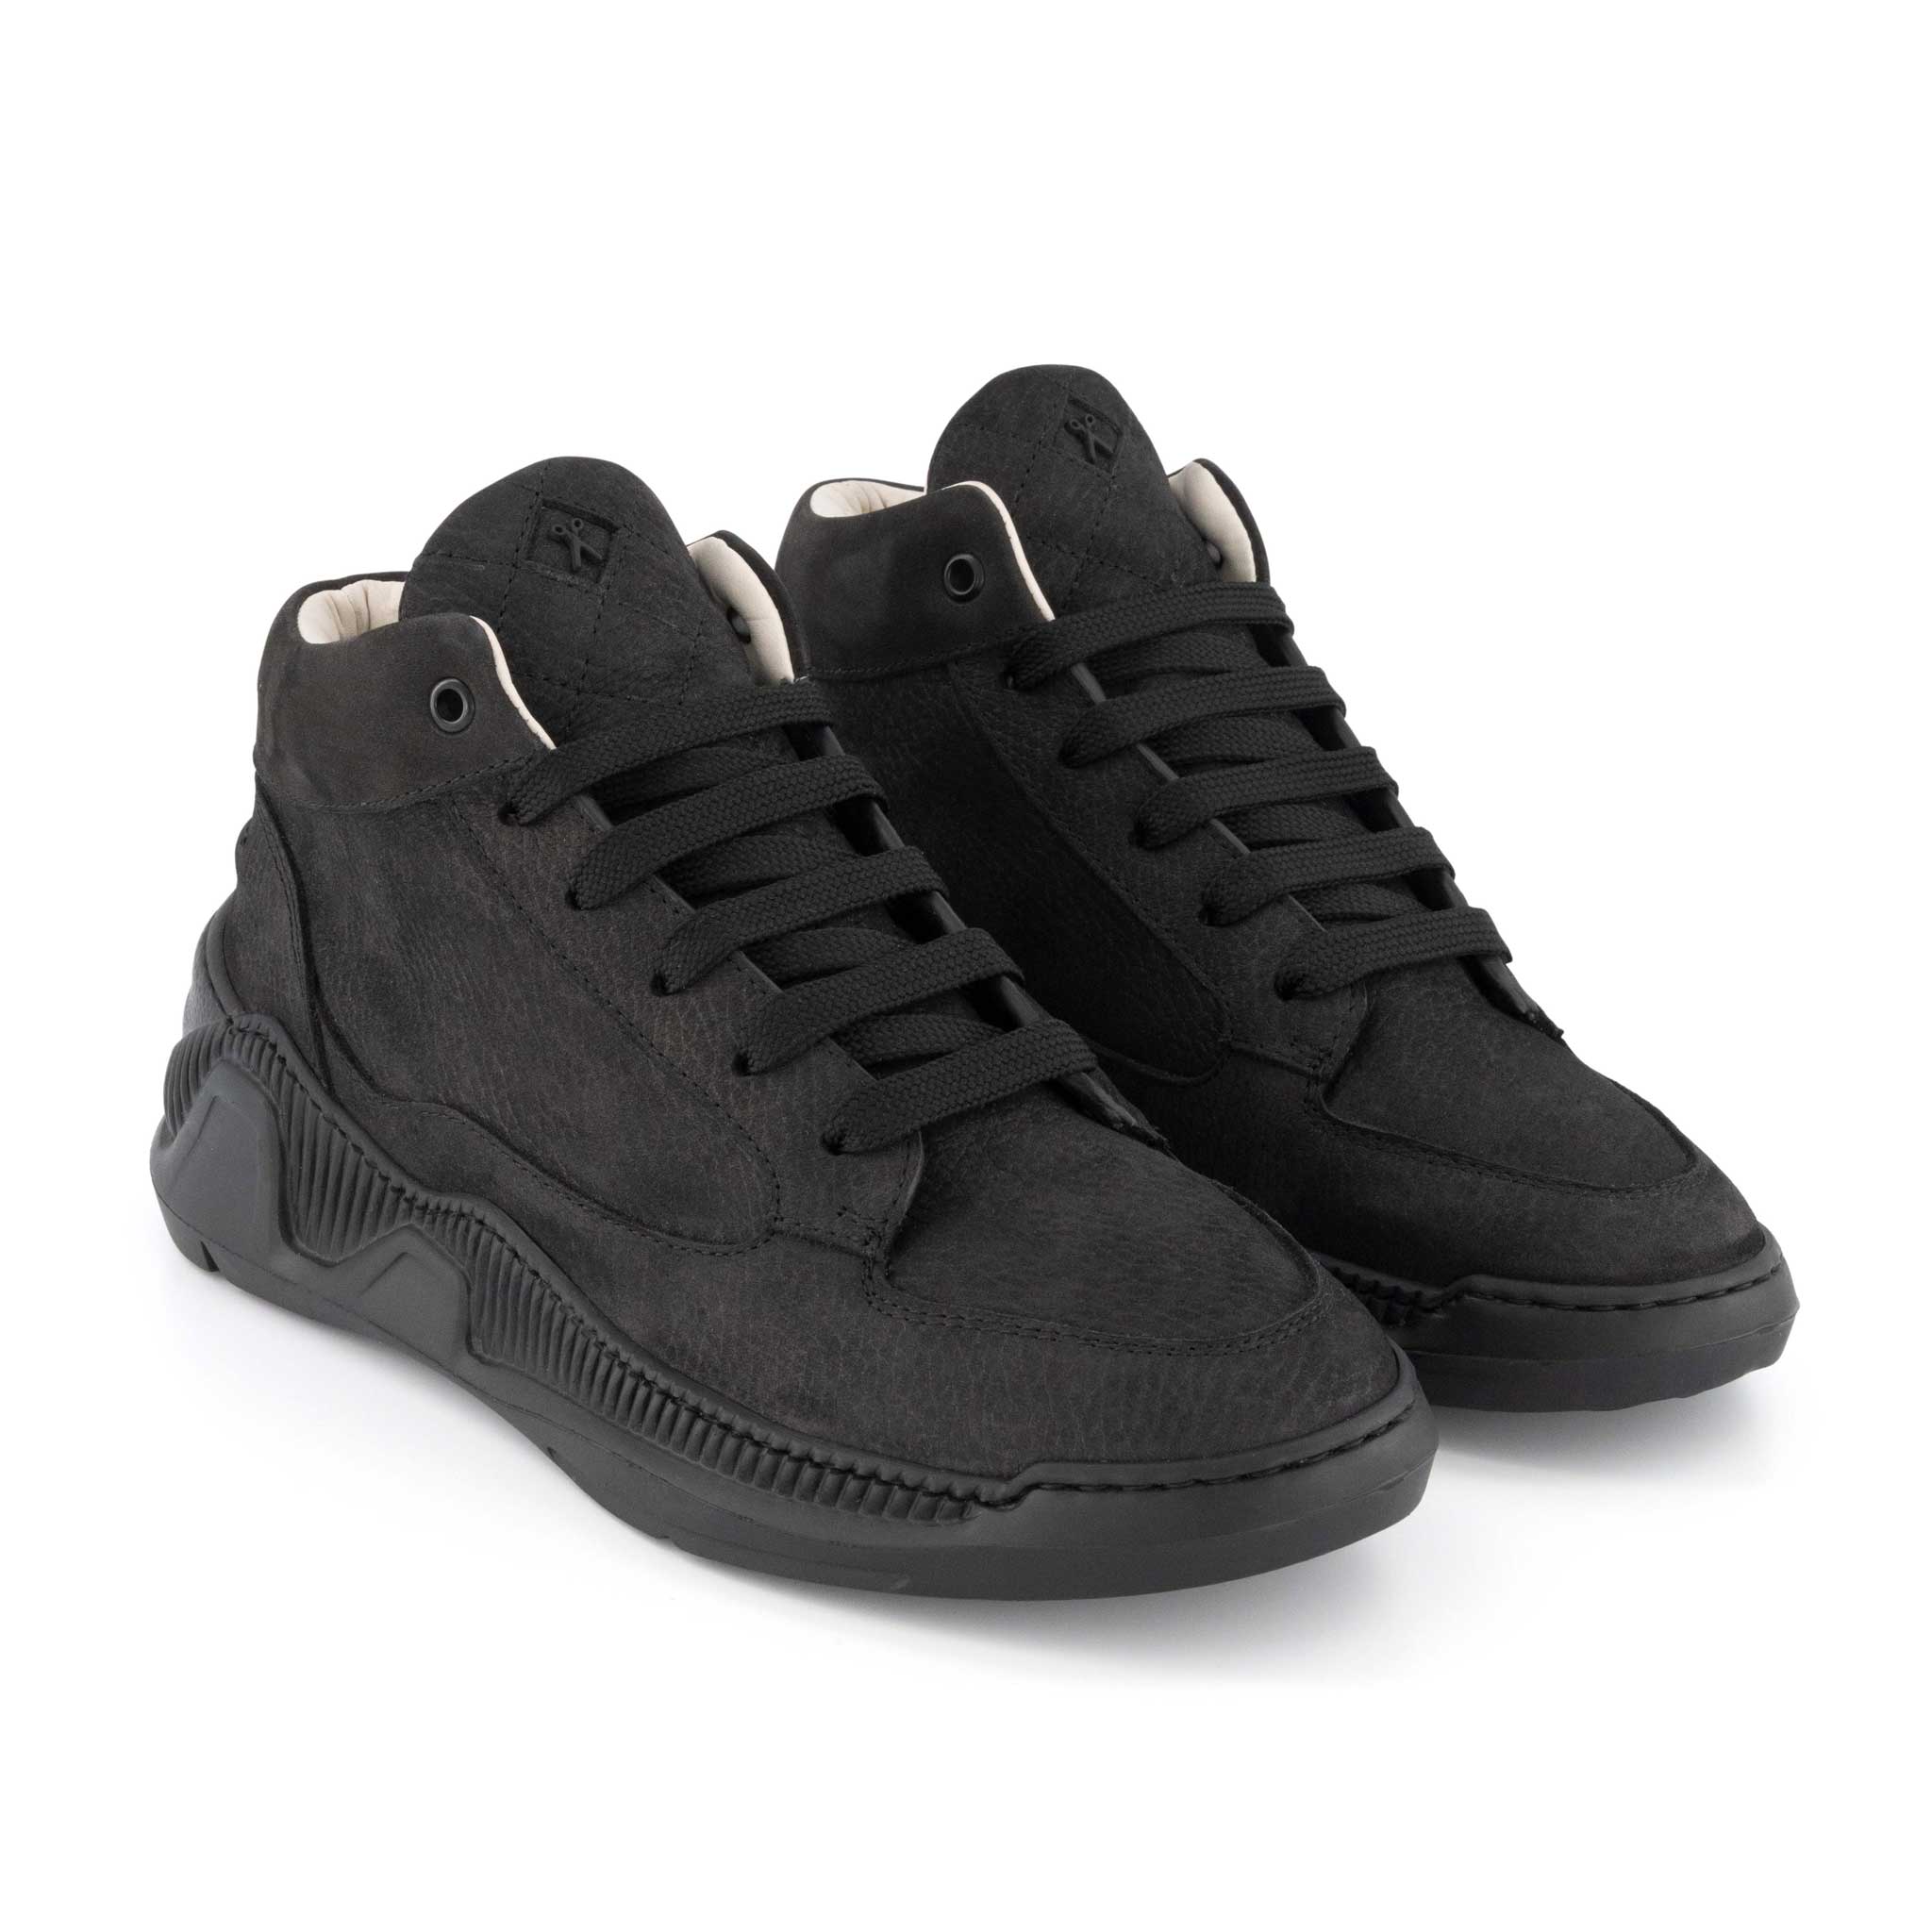 Dante Mid Top Sneaker - Black Nubuck Italian Leather | Made in Italy | Sizes 37, 38, 45 & 46